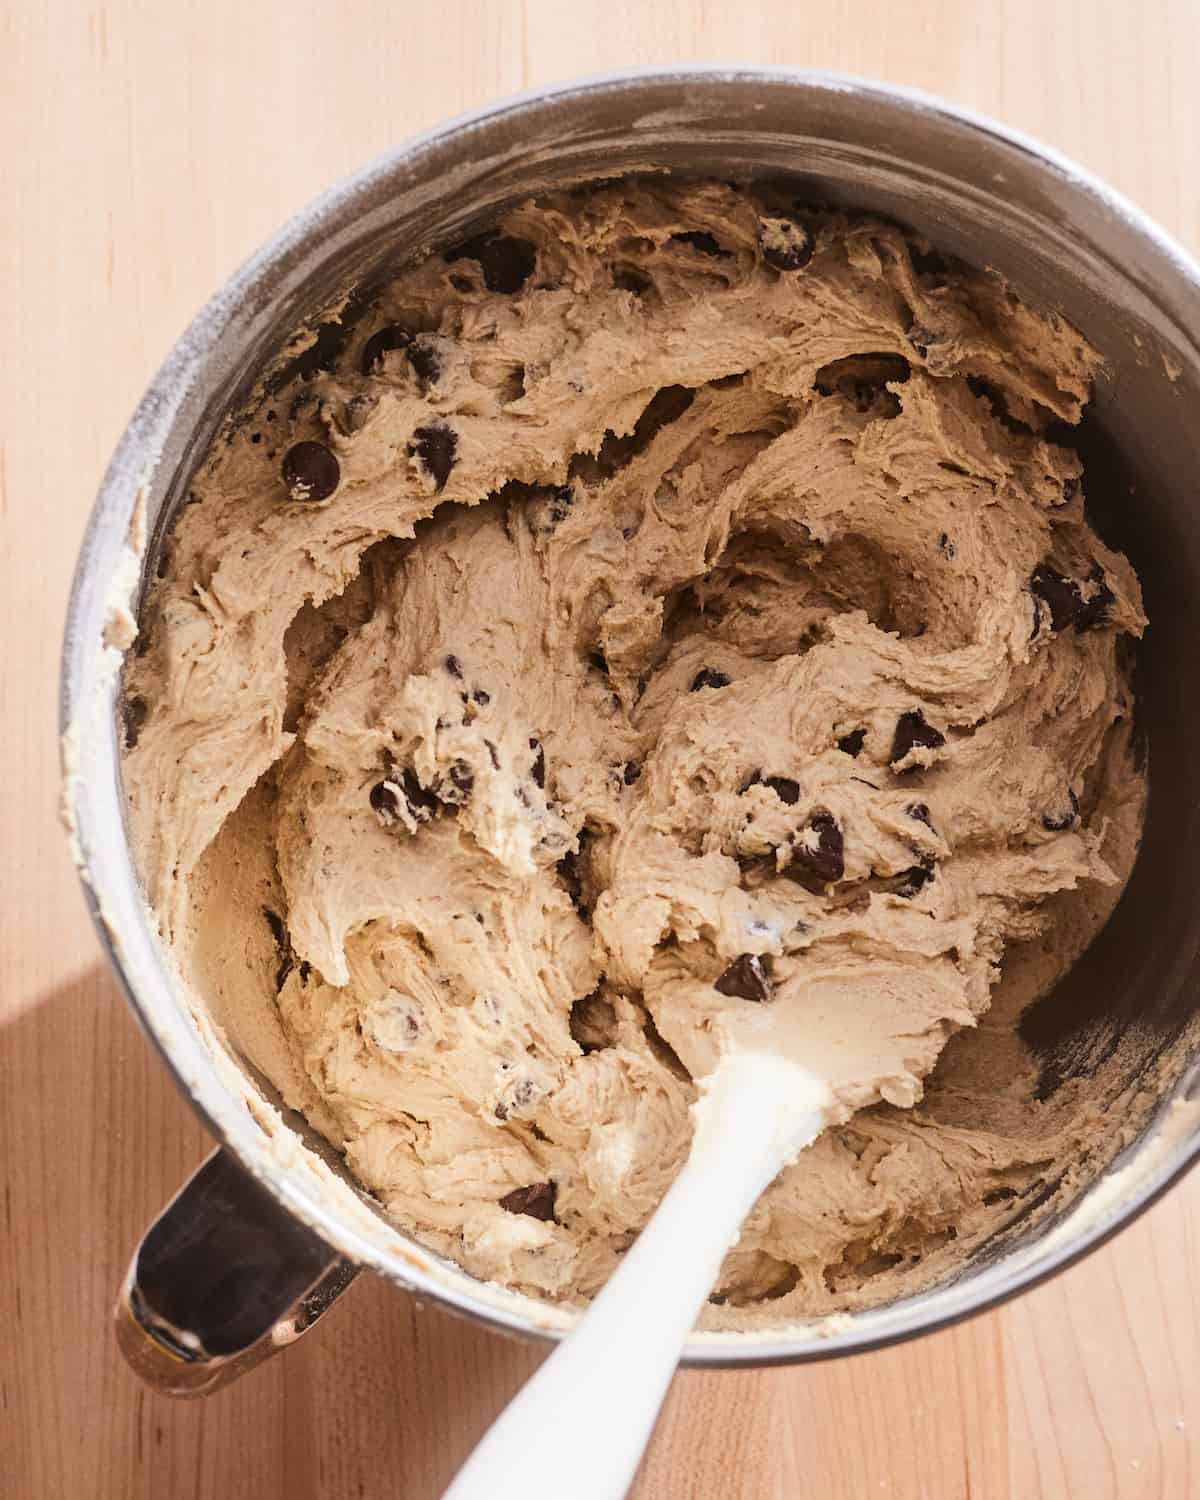 A mixing bowl full of cookie dough from The Best Chocolate Chip Cookie Recipe